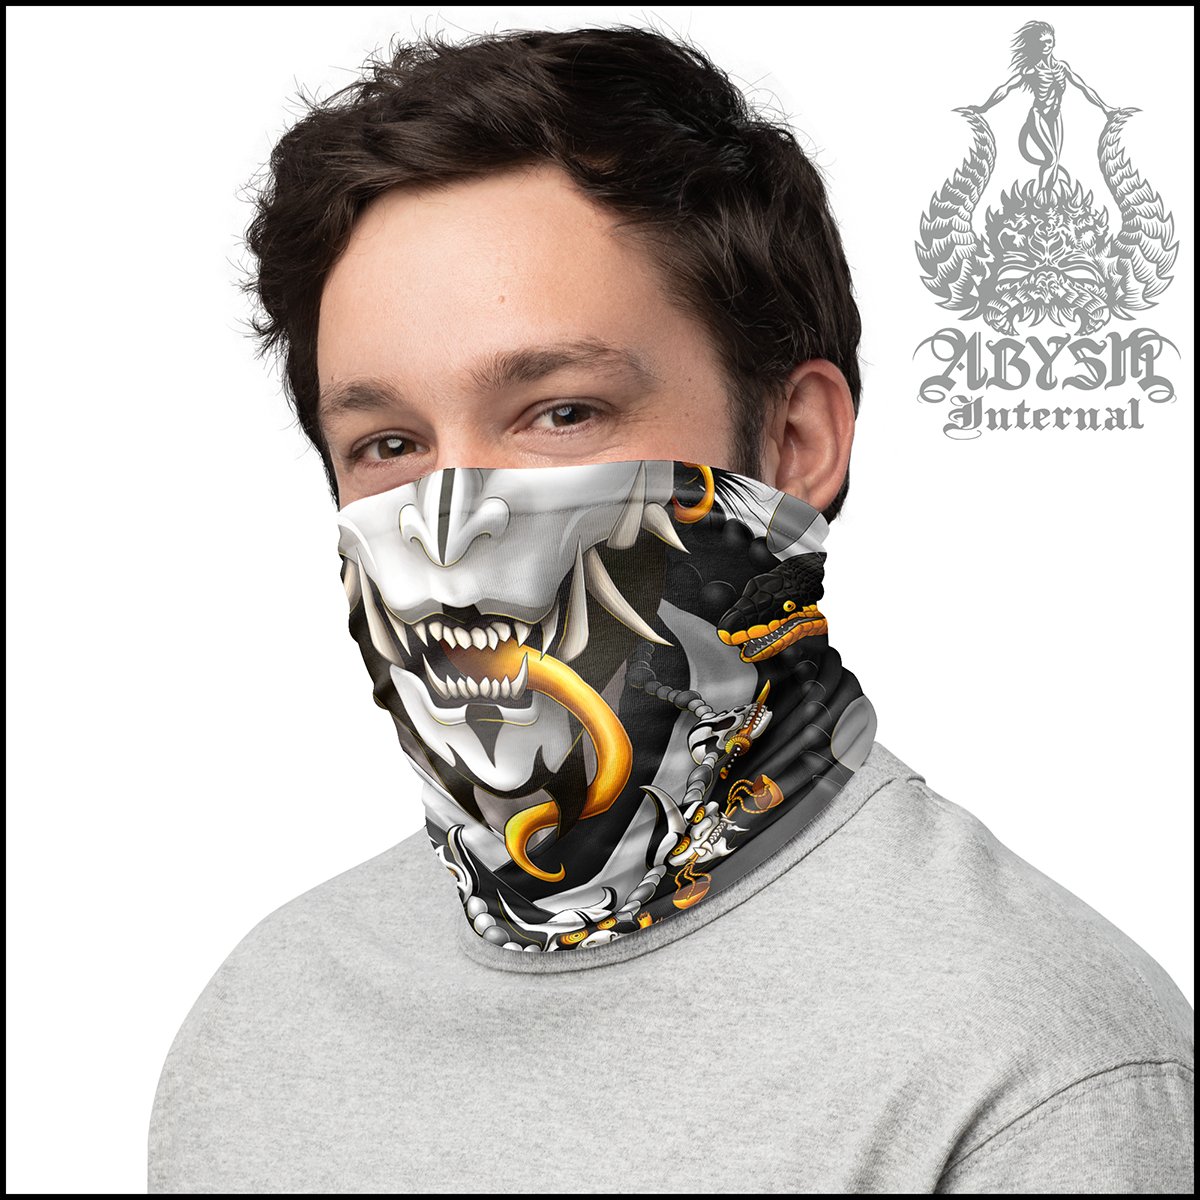 Demon Neck Gaiter, Oni Face Mask, Japanese Hannya Printed Head Covering, Graffiti Street Outfit, Snake, Fangs, Headband - Black and White - Abysm Internal